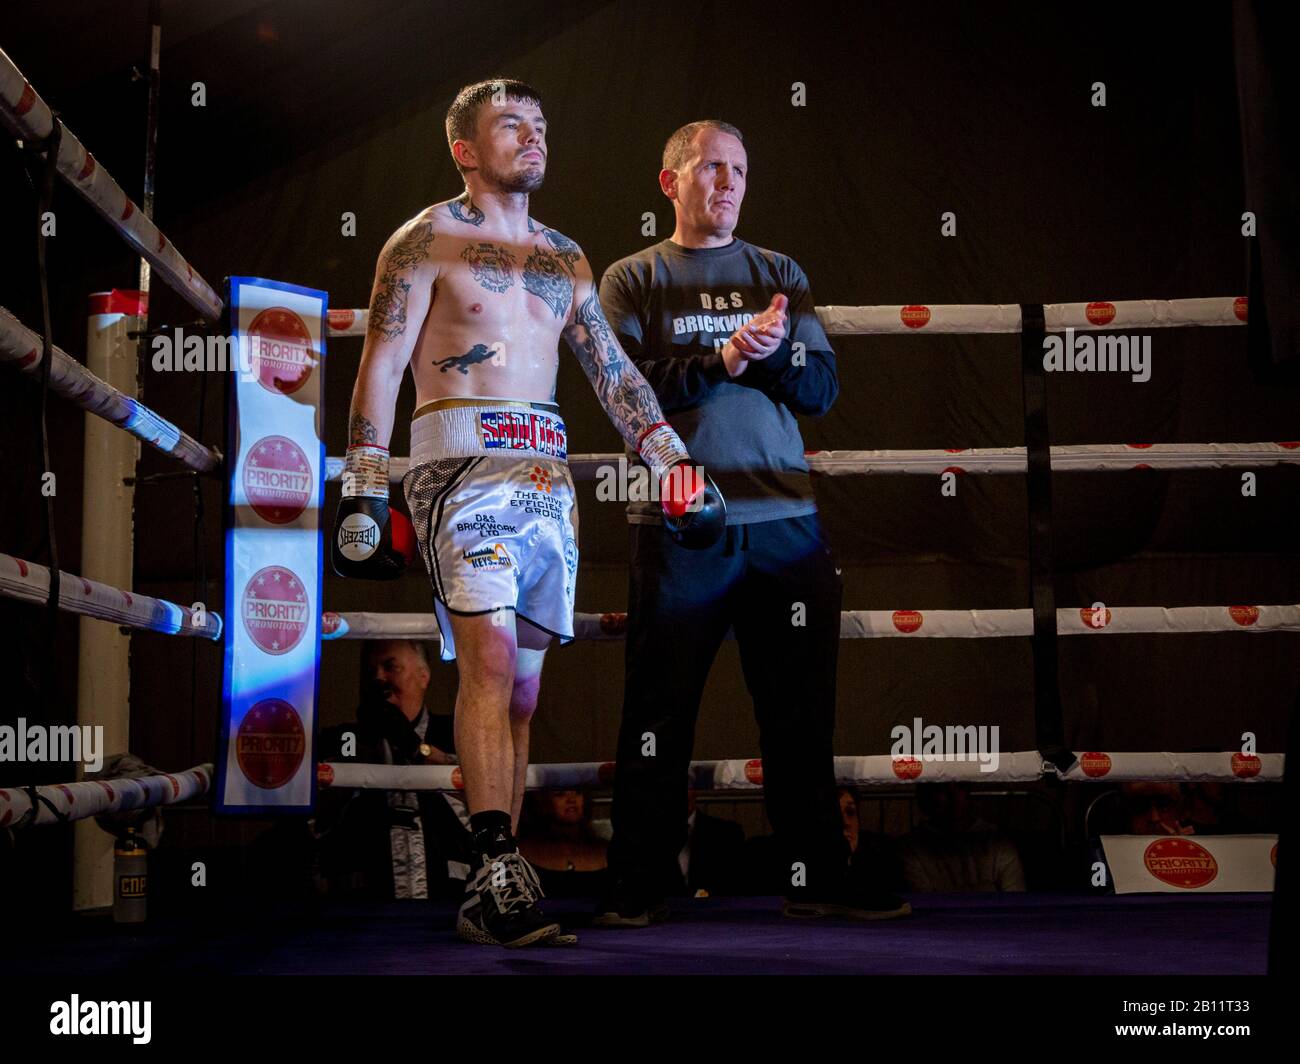 TAUNTON, UNITED KINGDOM. 21 Feb 2020. Yeovil boxer Dean Dodge (black trunks) fought Birmingham boxer and former English Champion & WBC International Super Bantamweight Champion Sean Davis (white trunks) at the Wellsprings Leisure Centre in Taunton, hosted by Priority Boxing Promotions. He fought hard to get a knock-out from the start but due to damaging his right hand in the second round he was hindered but won on points after 6 three-minute rounds. This makes Dodge, nicknamed El Diablo, undefeated in 10 professional fights and confident of a title shot in the near future. Stock Photo